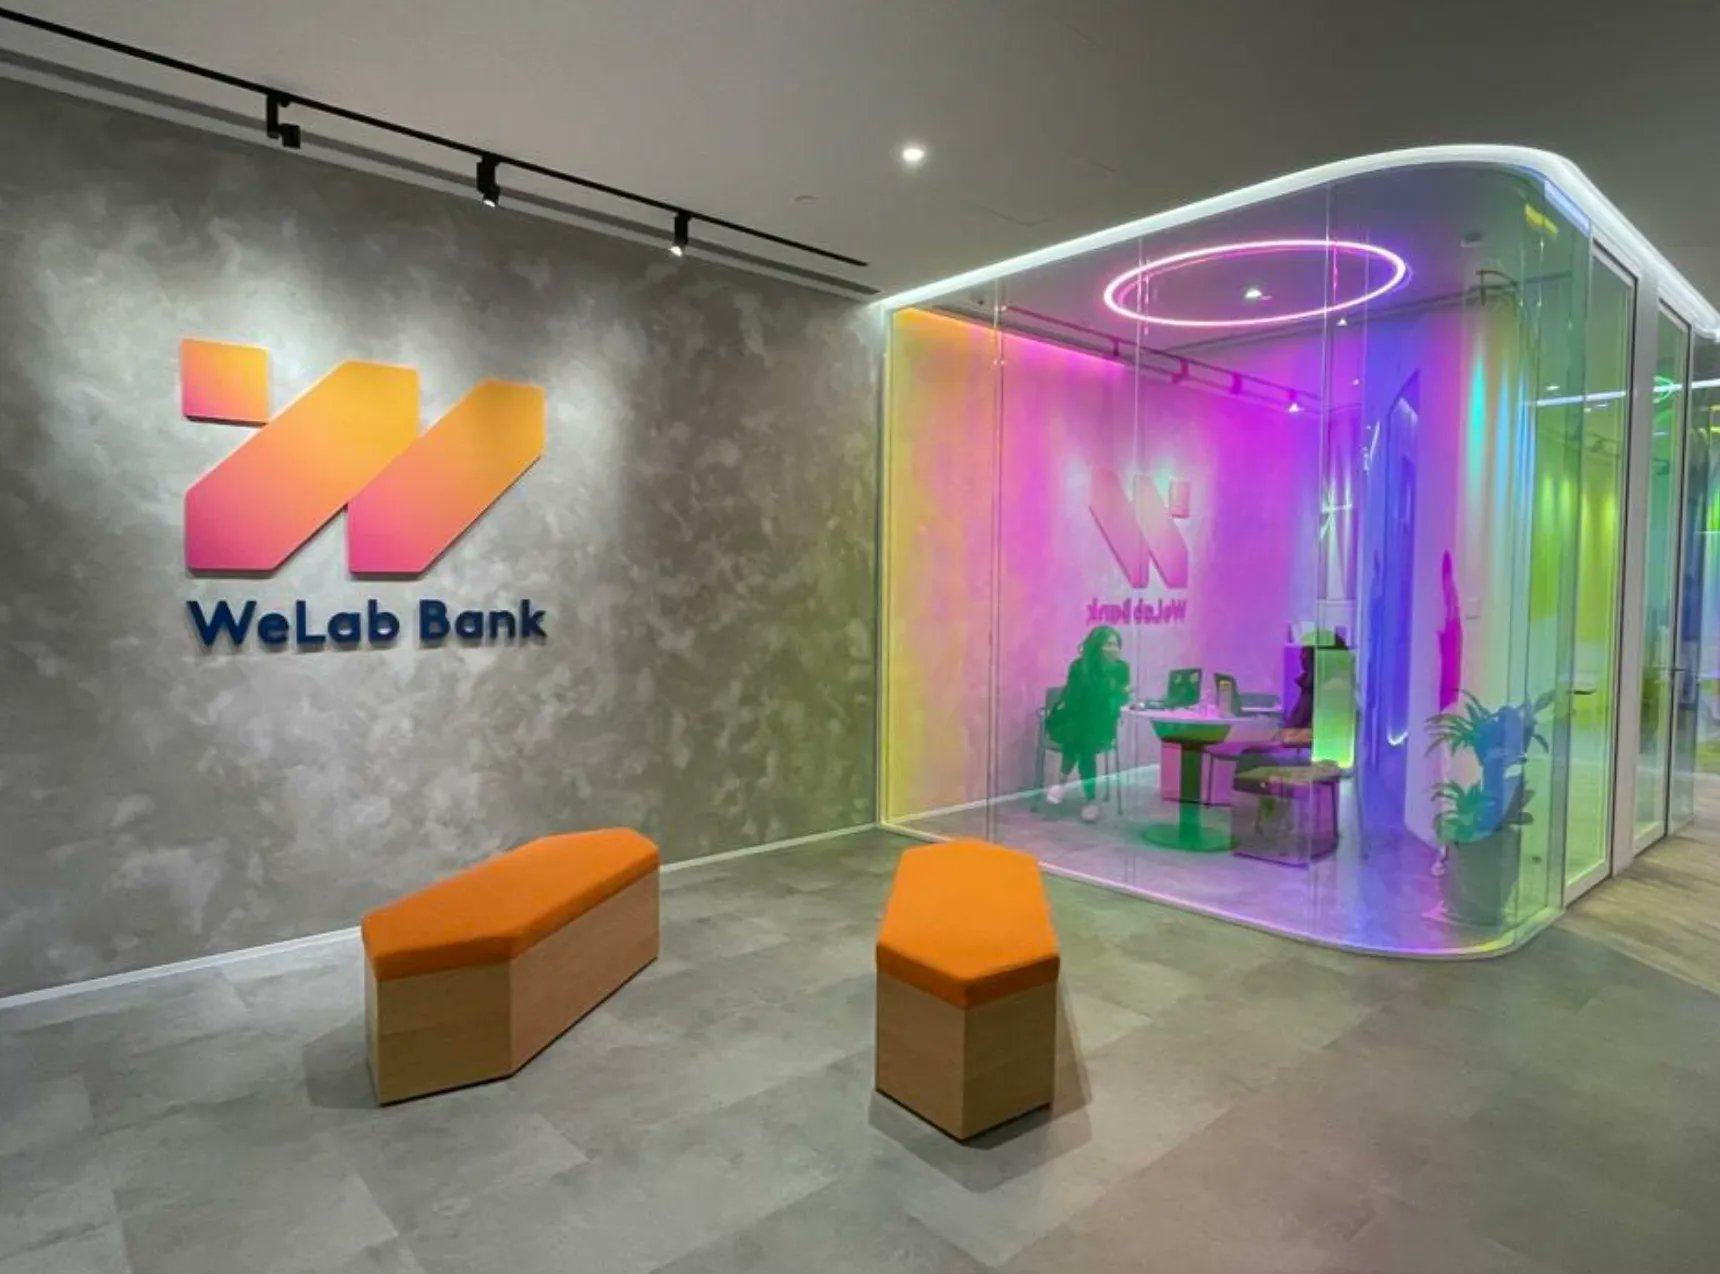 The expansion plan forms part of the target the company set last year to grow its users to 500 million by 2032, according to founder Simon Loong. Photo: WeLab